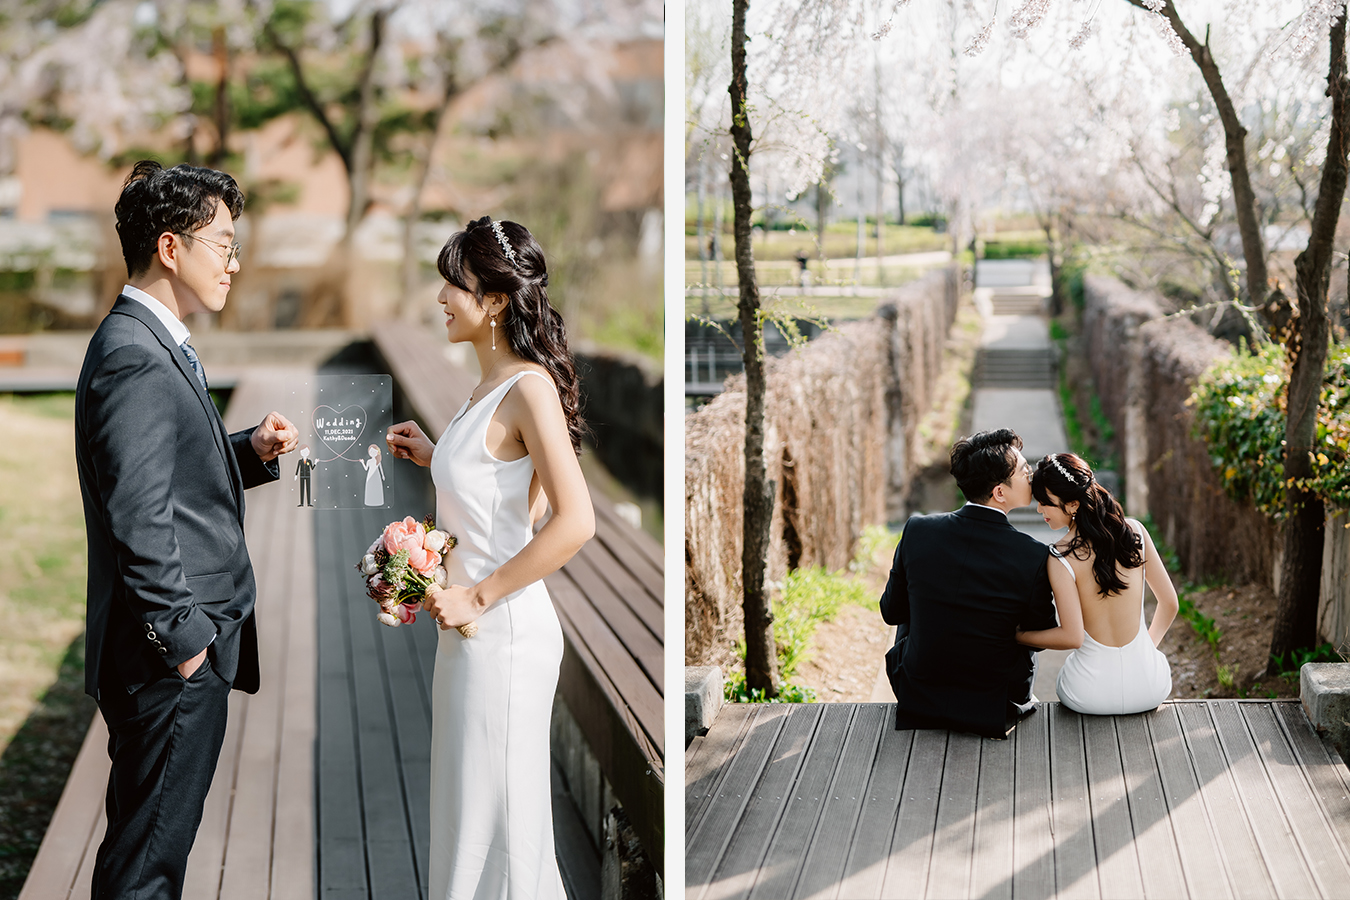 Cute Korea Pre-Wedding Photoshoot Under the Cherry Blossoms Trees by Jungyeol on OneThreeOneFour 3